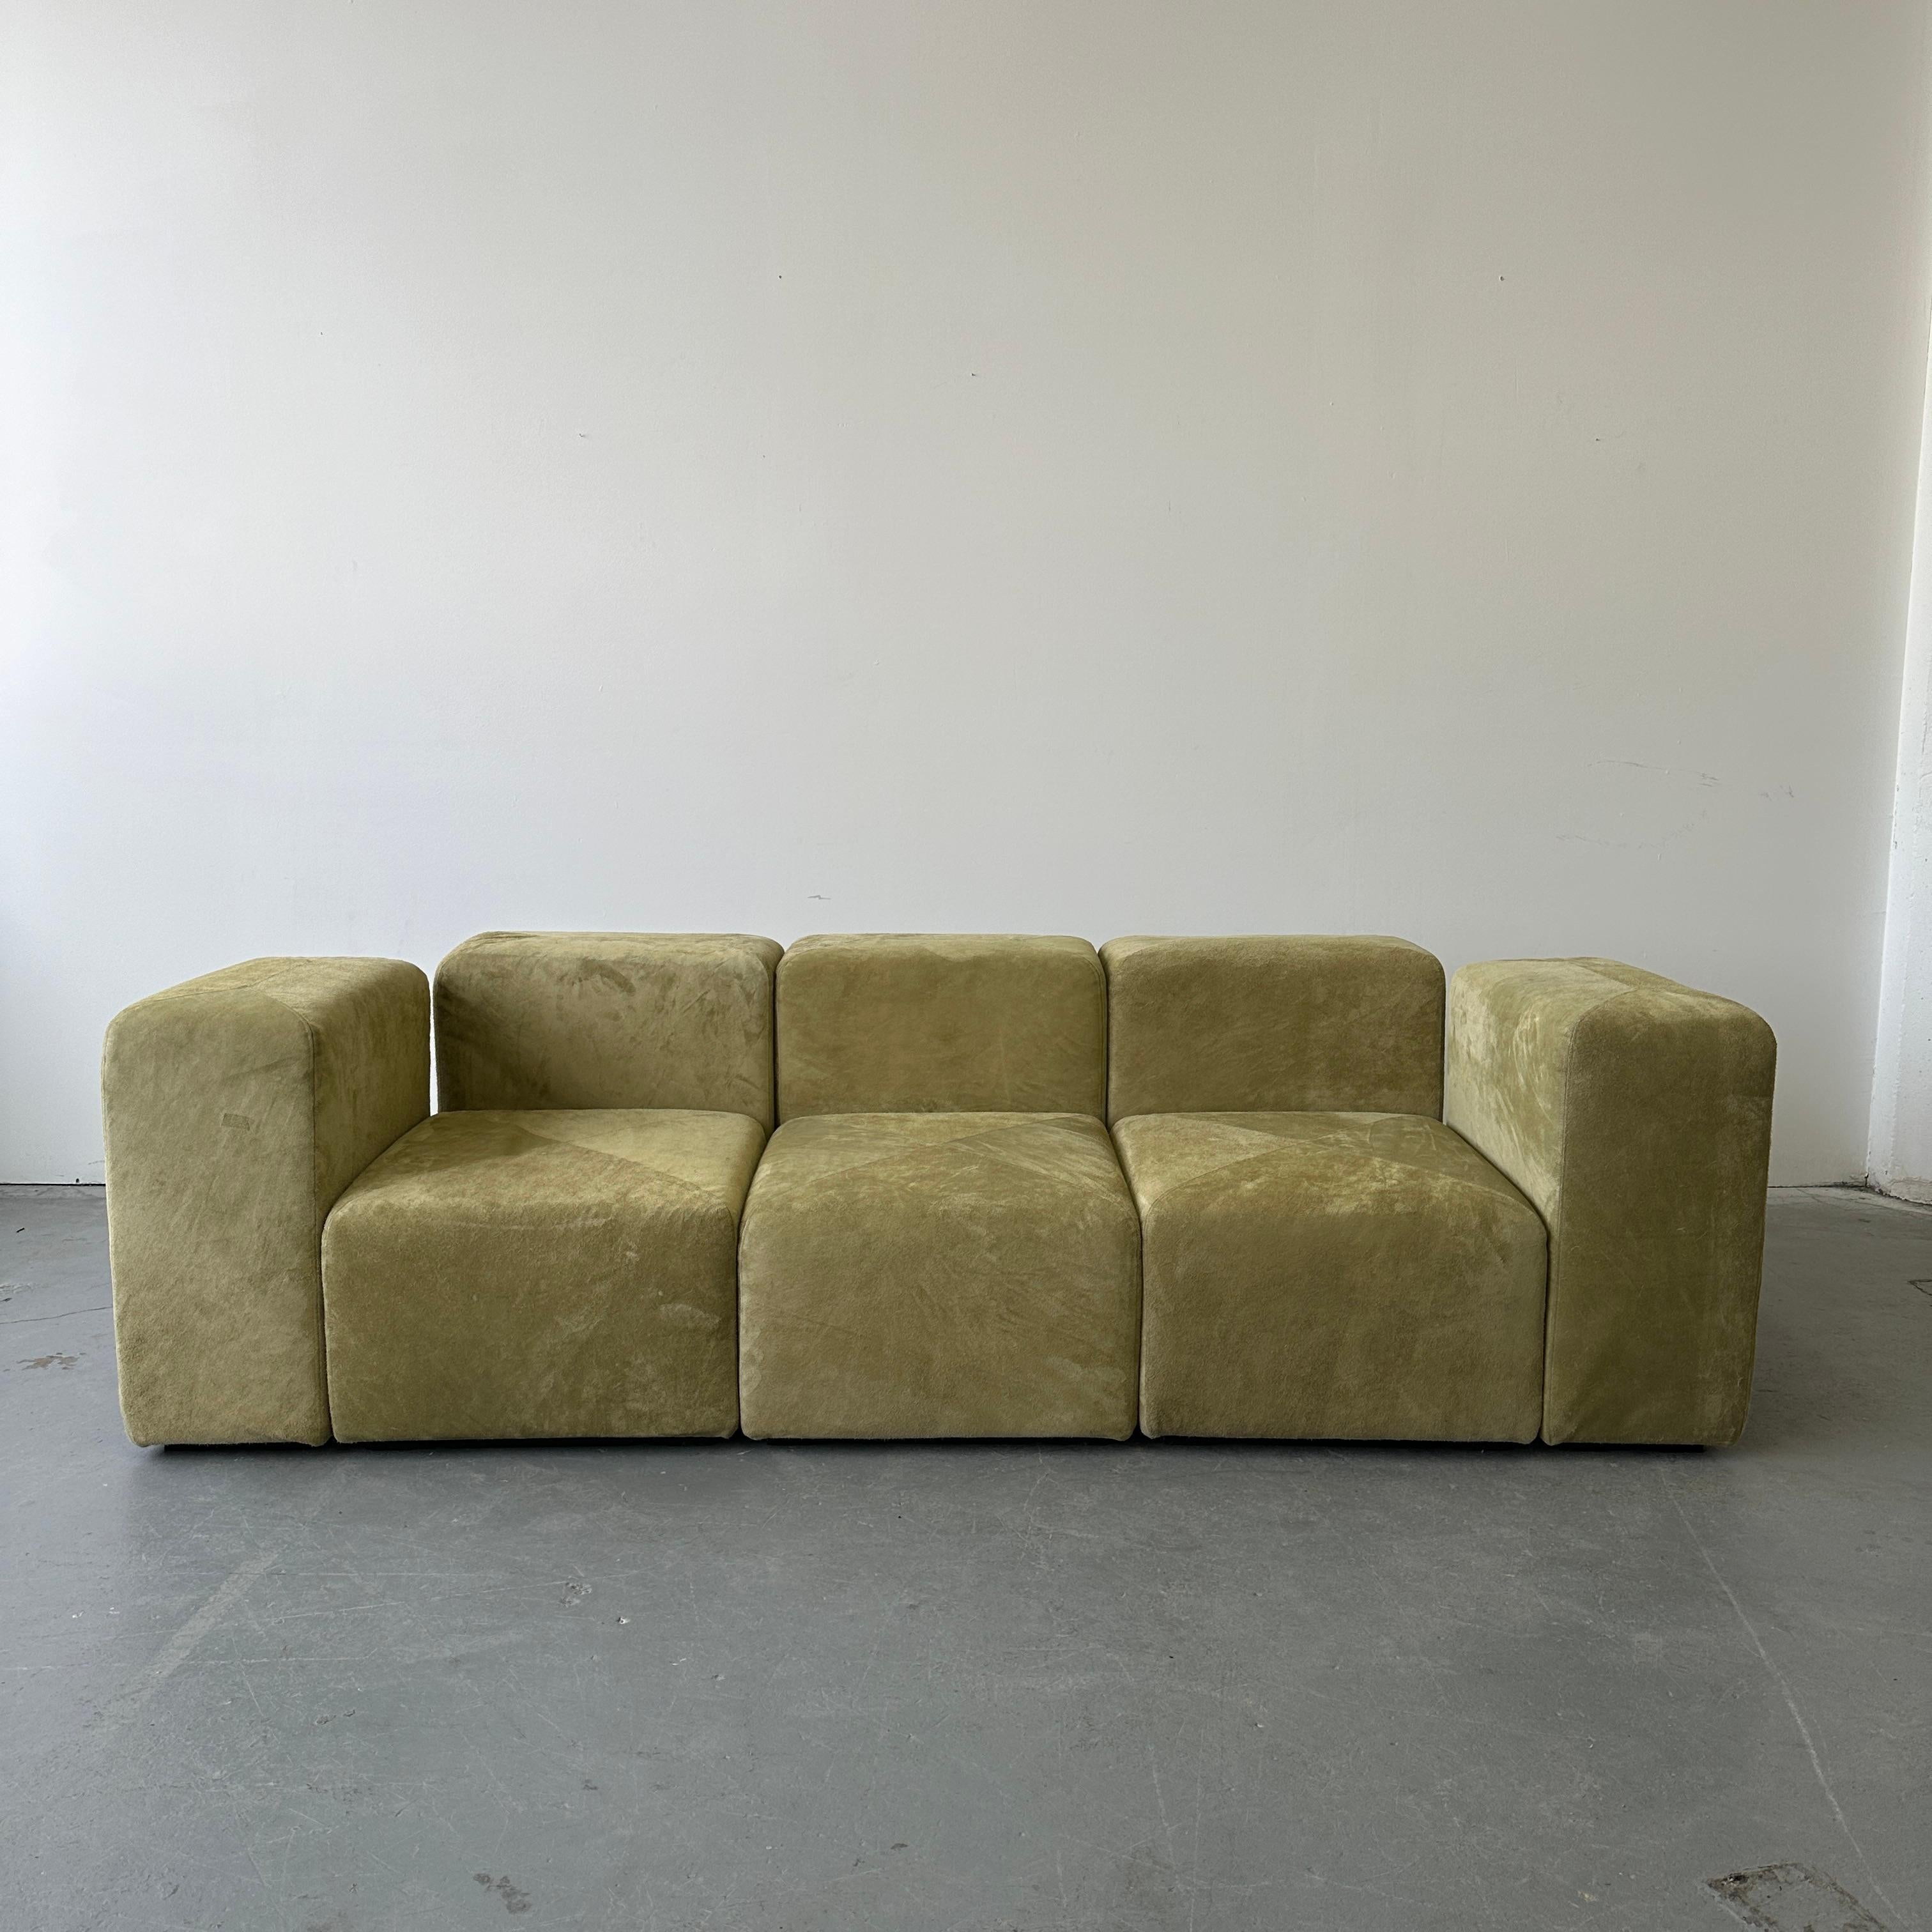 Signed c. 1970s and fully reupholstered in Holly Hunt Suede. This set is fully modular. Each piece can be removed and rearranged. Metal connectors that reach deep under the sofa give full stability and ensure that each arrangement sits comfortably.